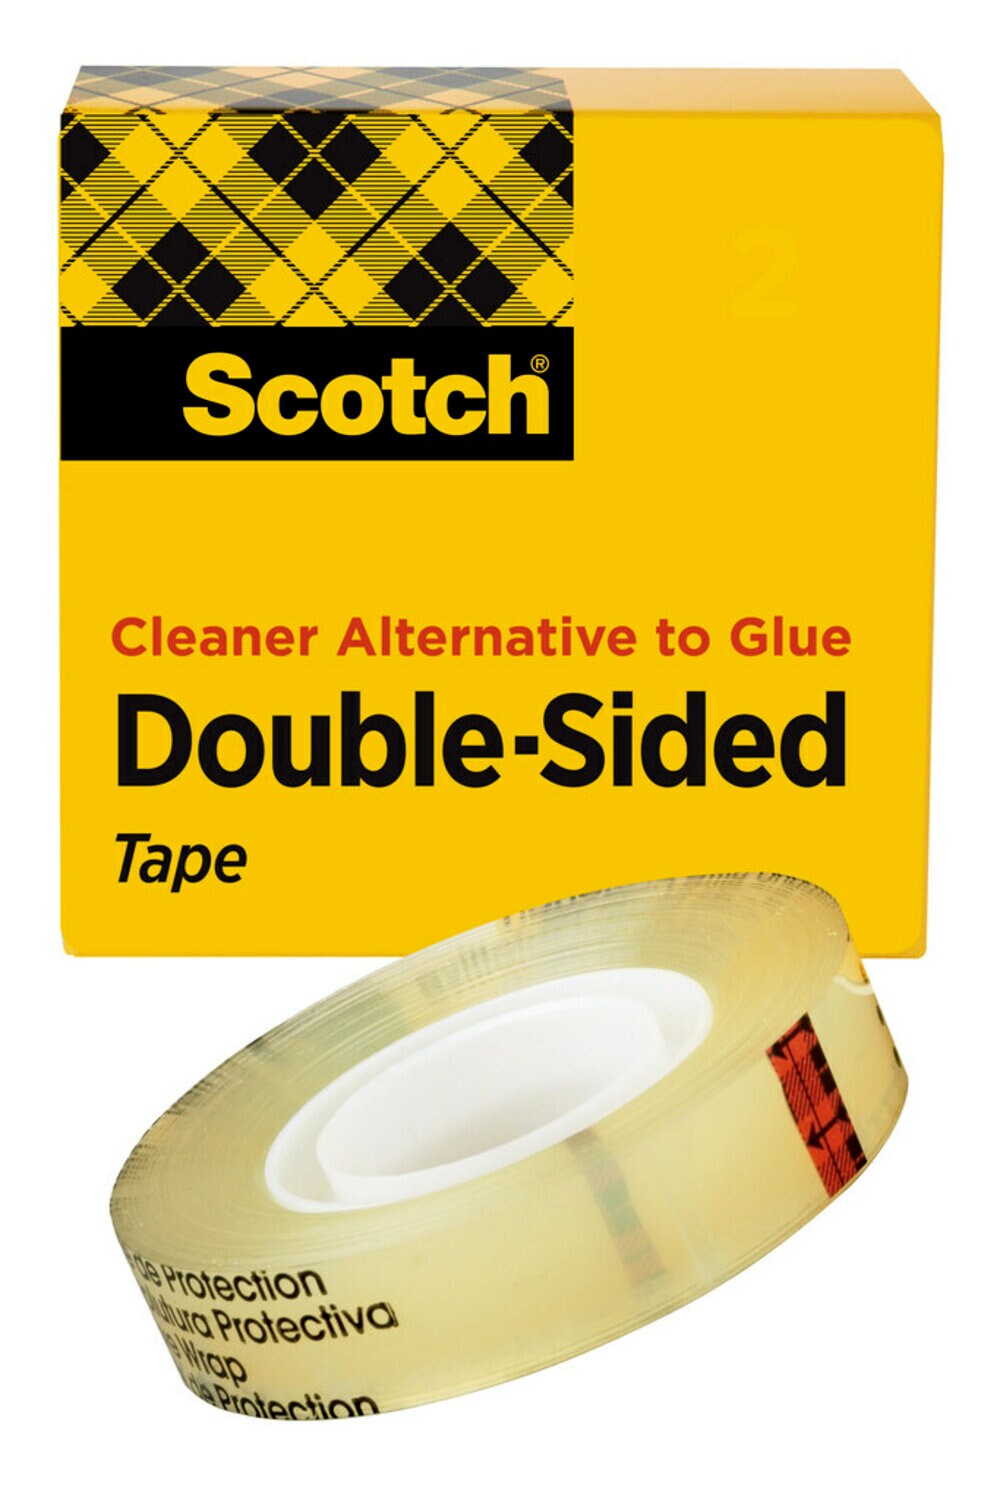 7000050005 - Scotch Double Sided Tape 665, 3/4 in x 36 yd, 48 Roll/Case